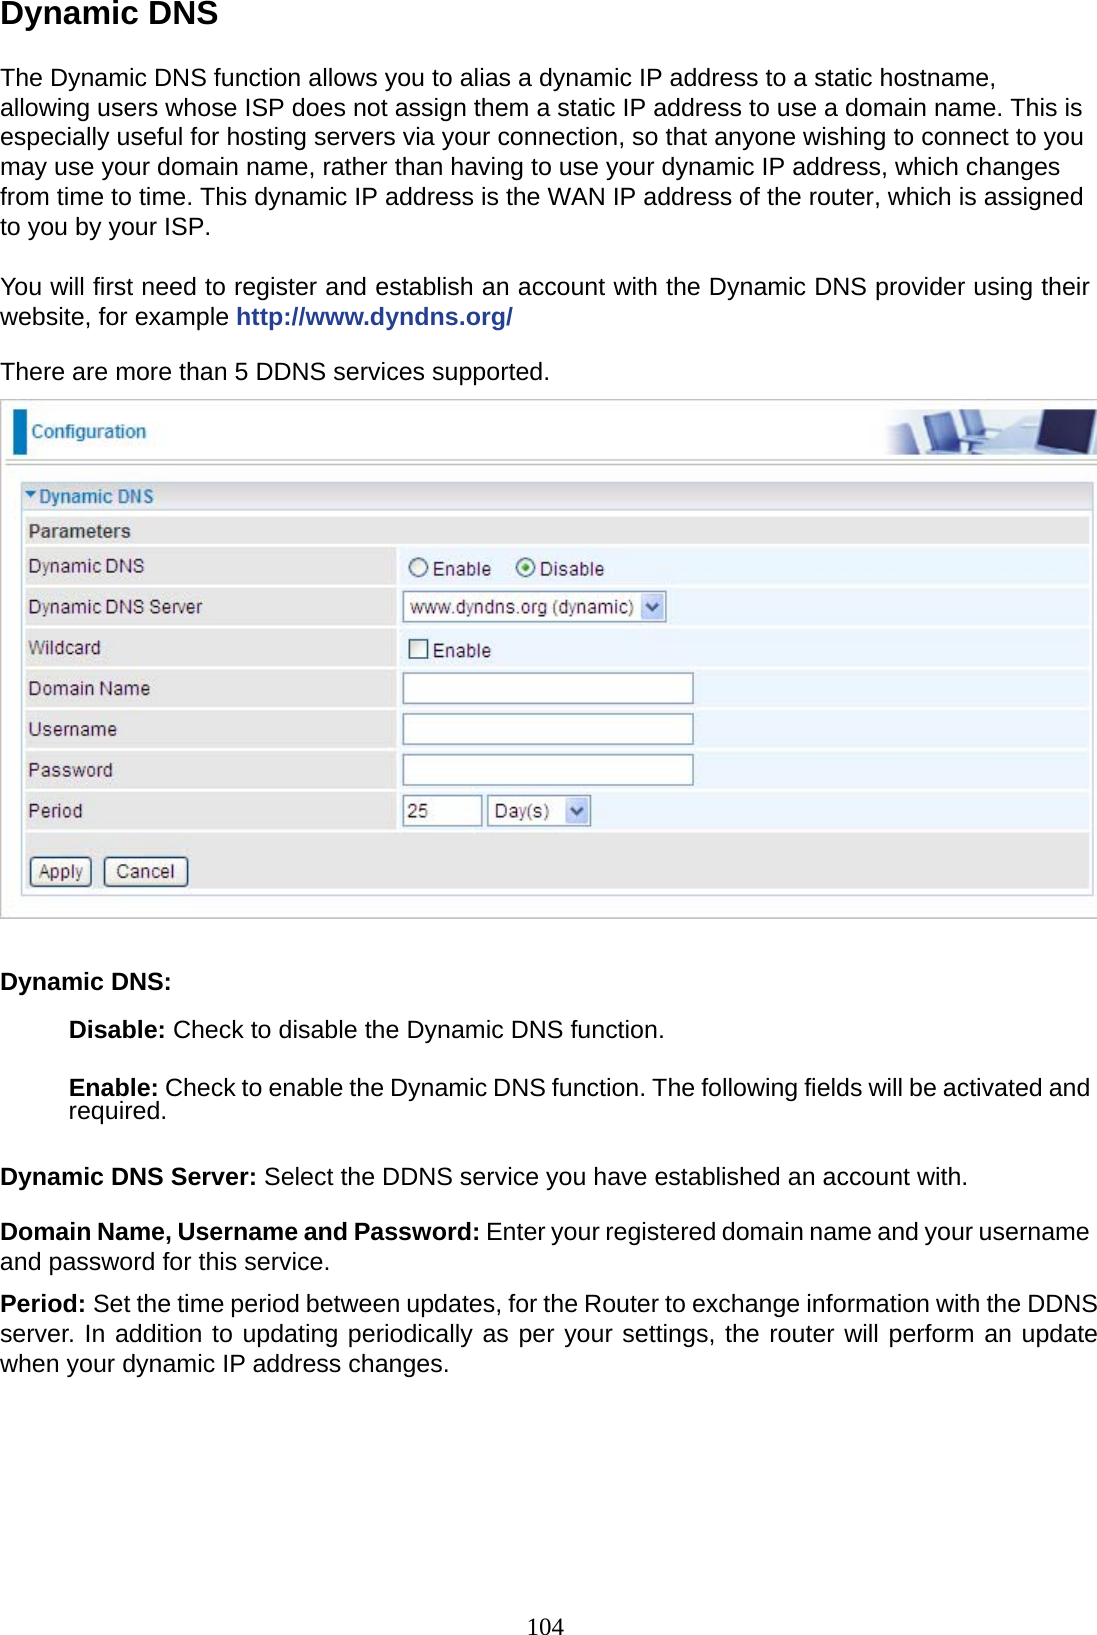 104 Dynamic DNS  The Dynamic DNS function allows you to alias a dynamic IP address to a static hostname, allowing users whose ISP does not assign them a static IP address to use a domain name. This is especially useful for hosting servers via your connection, so that anyone wishing to connect to you may use your domain name, rather than having to use your dynamic IP address, which changes from time to time. This dynamic IP address is the WAN IP address of the router, which is assigned to you by your ISP.  You will first need to register and establish an account with the Dynamic DNS provider using their website, for example http://www.dyndns.org/  There are more than 5 DDNS services supported.    Dynamic DNS:  Disable: Check to disable the Dynamic DNS function.   Enable: Check to enable the Dynamic DNS function. The following fields will be activated and required.   Dynamic DNS Server: Select the DDNS service you have established an account with.  Domain Name, Username and Password: Enter your registered domain name and your username and password for this service.  Period: Set the time period between updates, for the Router to exchange information with the DDNS server. In addition to updating periodically as per your settings, the router will perform an update when your dynamic IP address changes.      